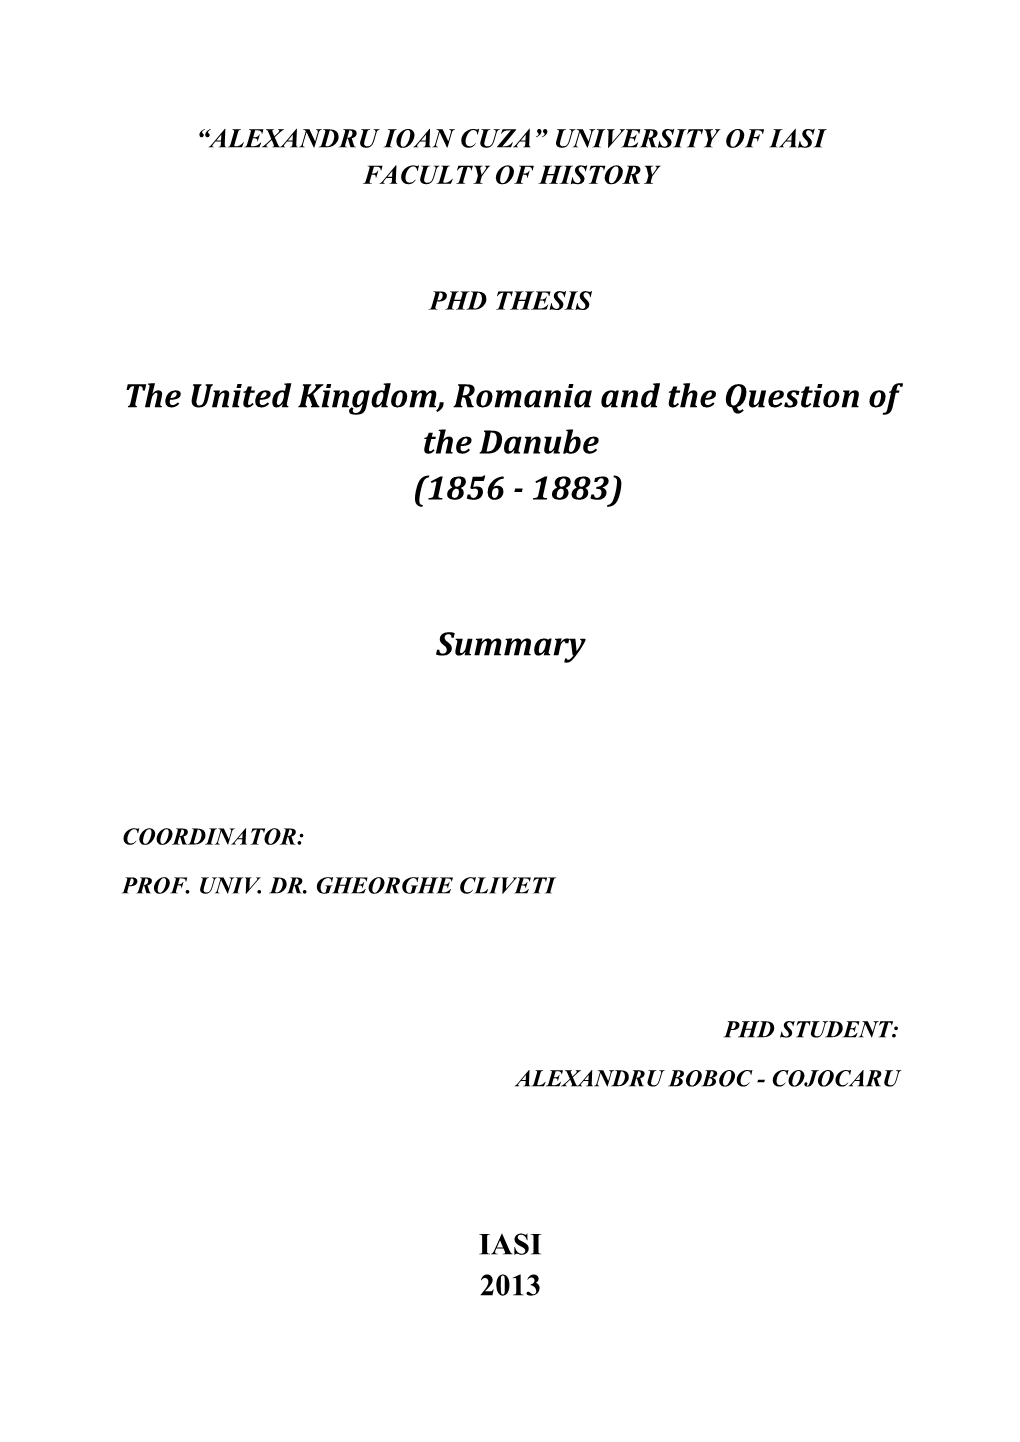 The United Kingdom, Romania and the Question of the Danube (1856 - 1883)